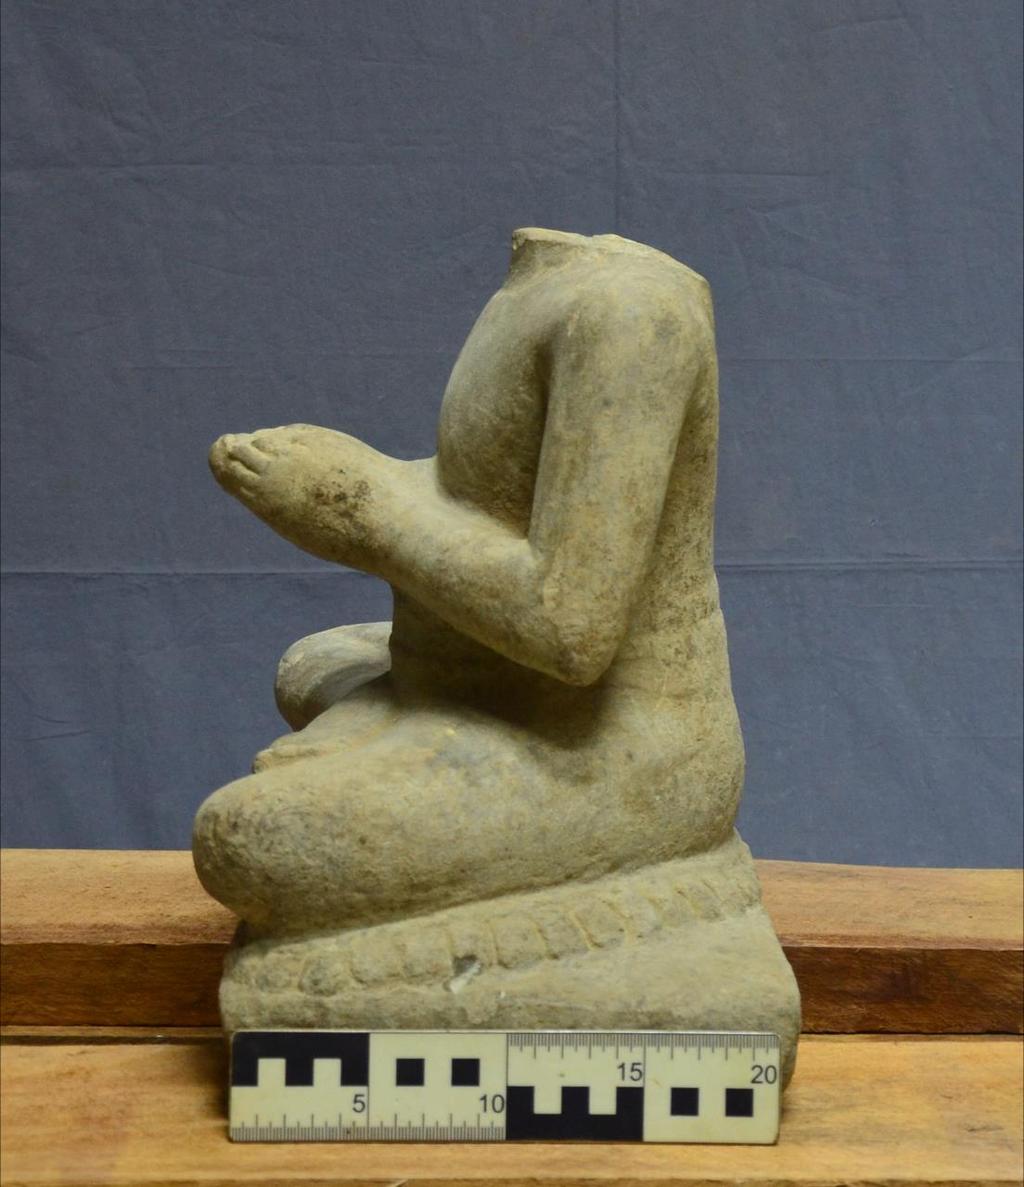 In Quest of Angkorian Medicine Buddha and Boddhisatva: New Archaeological Evidence Figure 2b: Medicine Bodhisattva Source: Preah Norodom Sihanouk-Angkor Museum Hospital Dvarapala On 30 July and 1